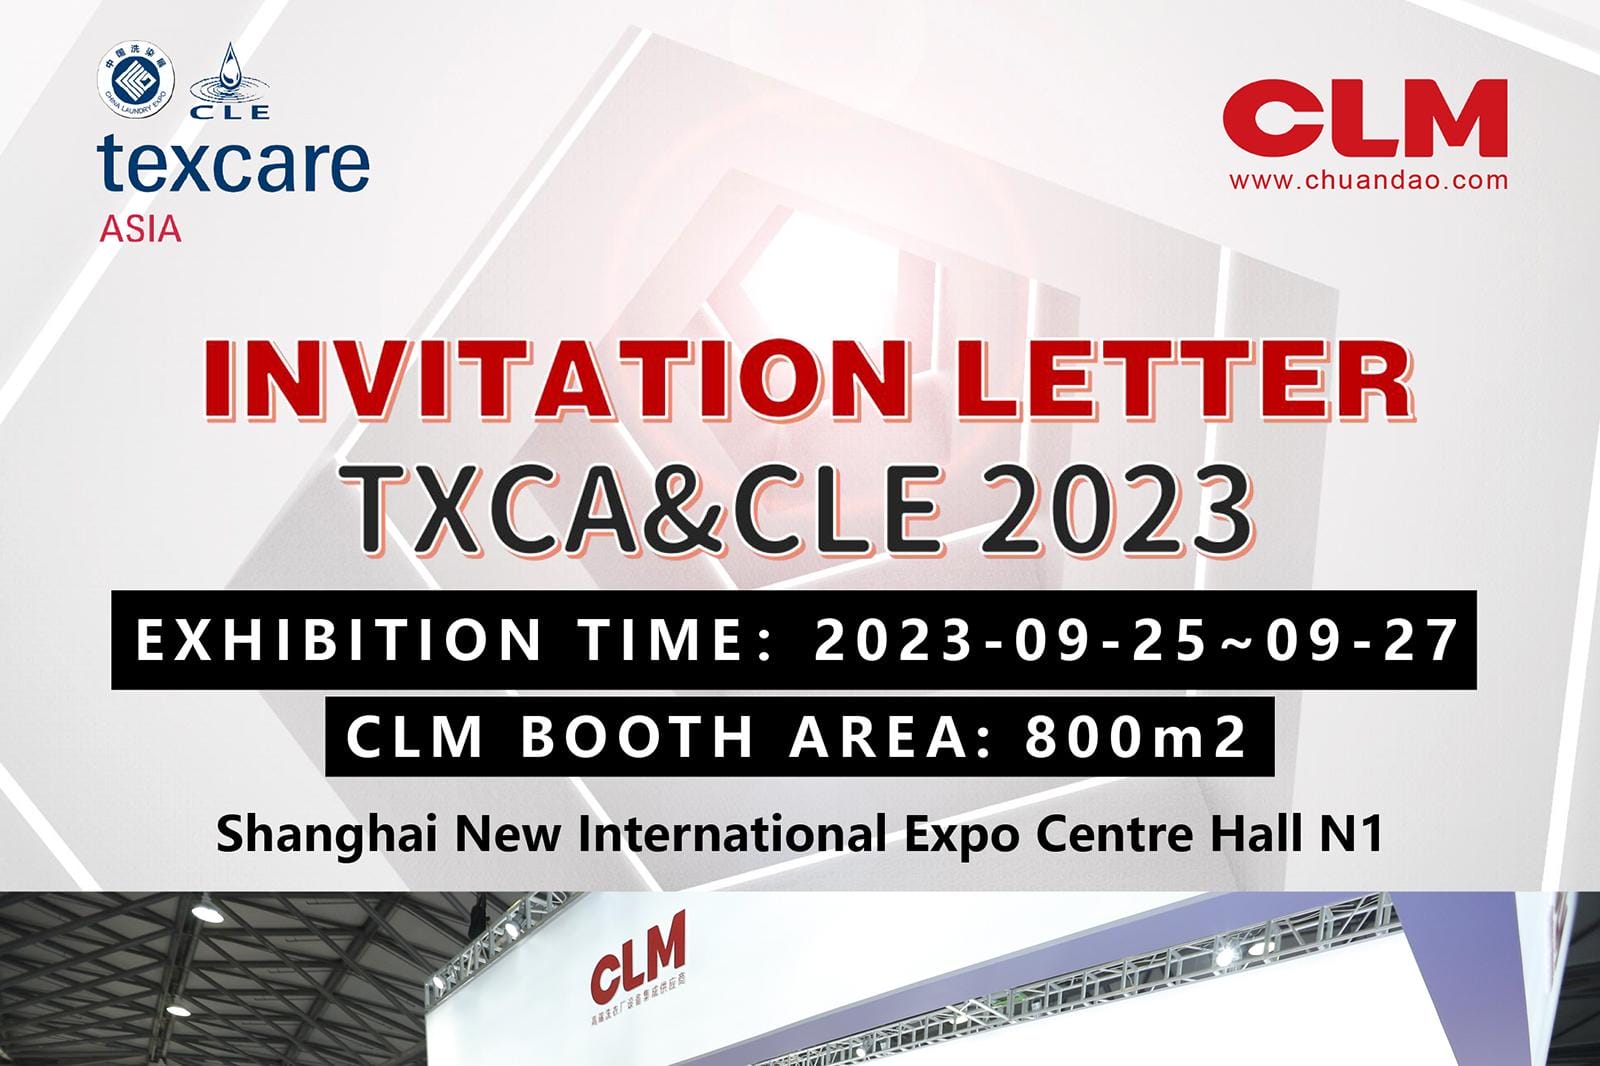 Invitation To CLM 2023 Texcare  Asia & China Laundry Expo (TXCA & CLE)